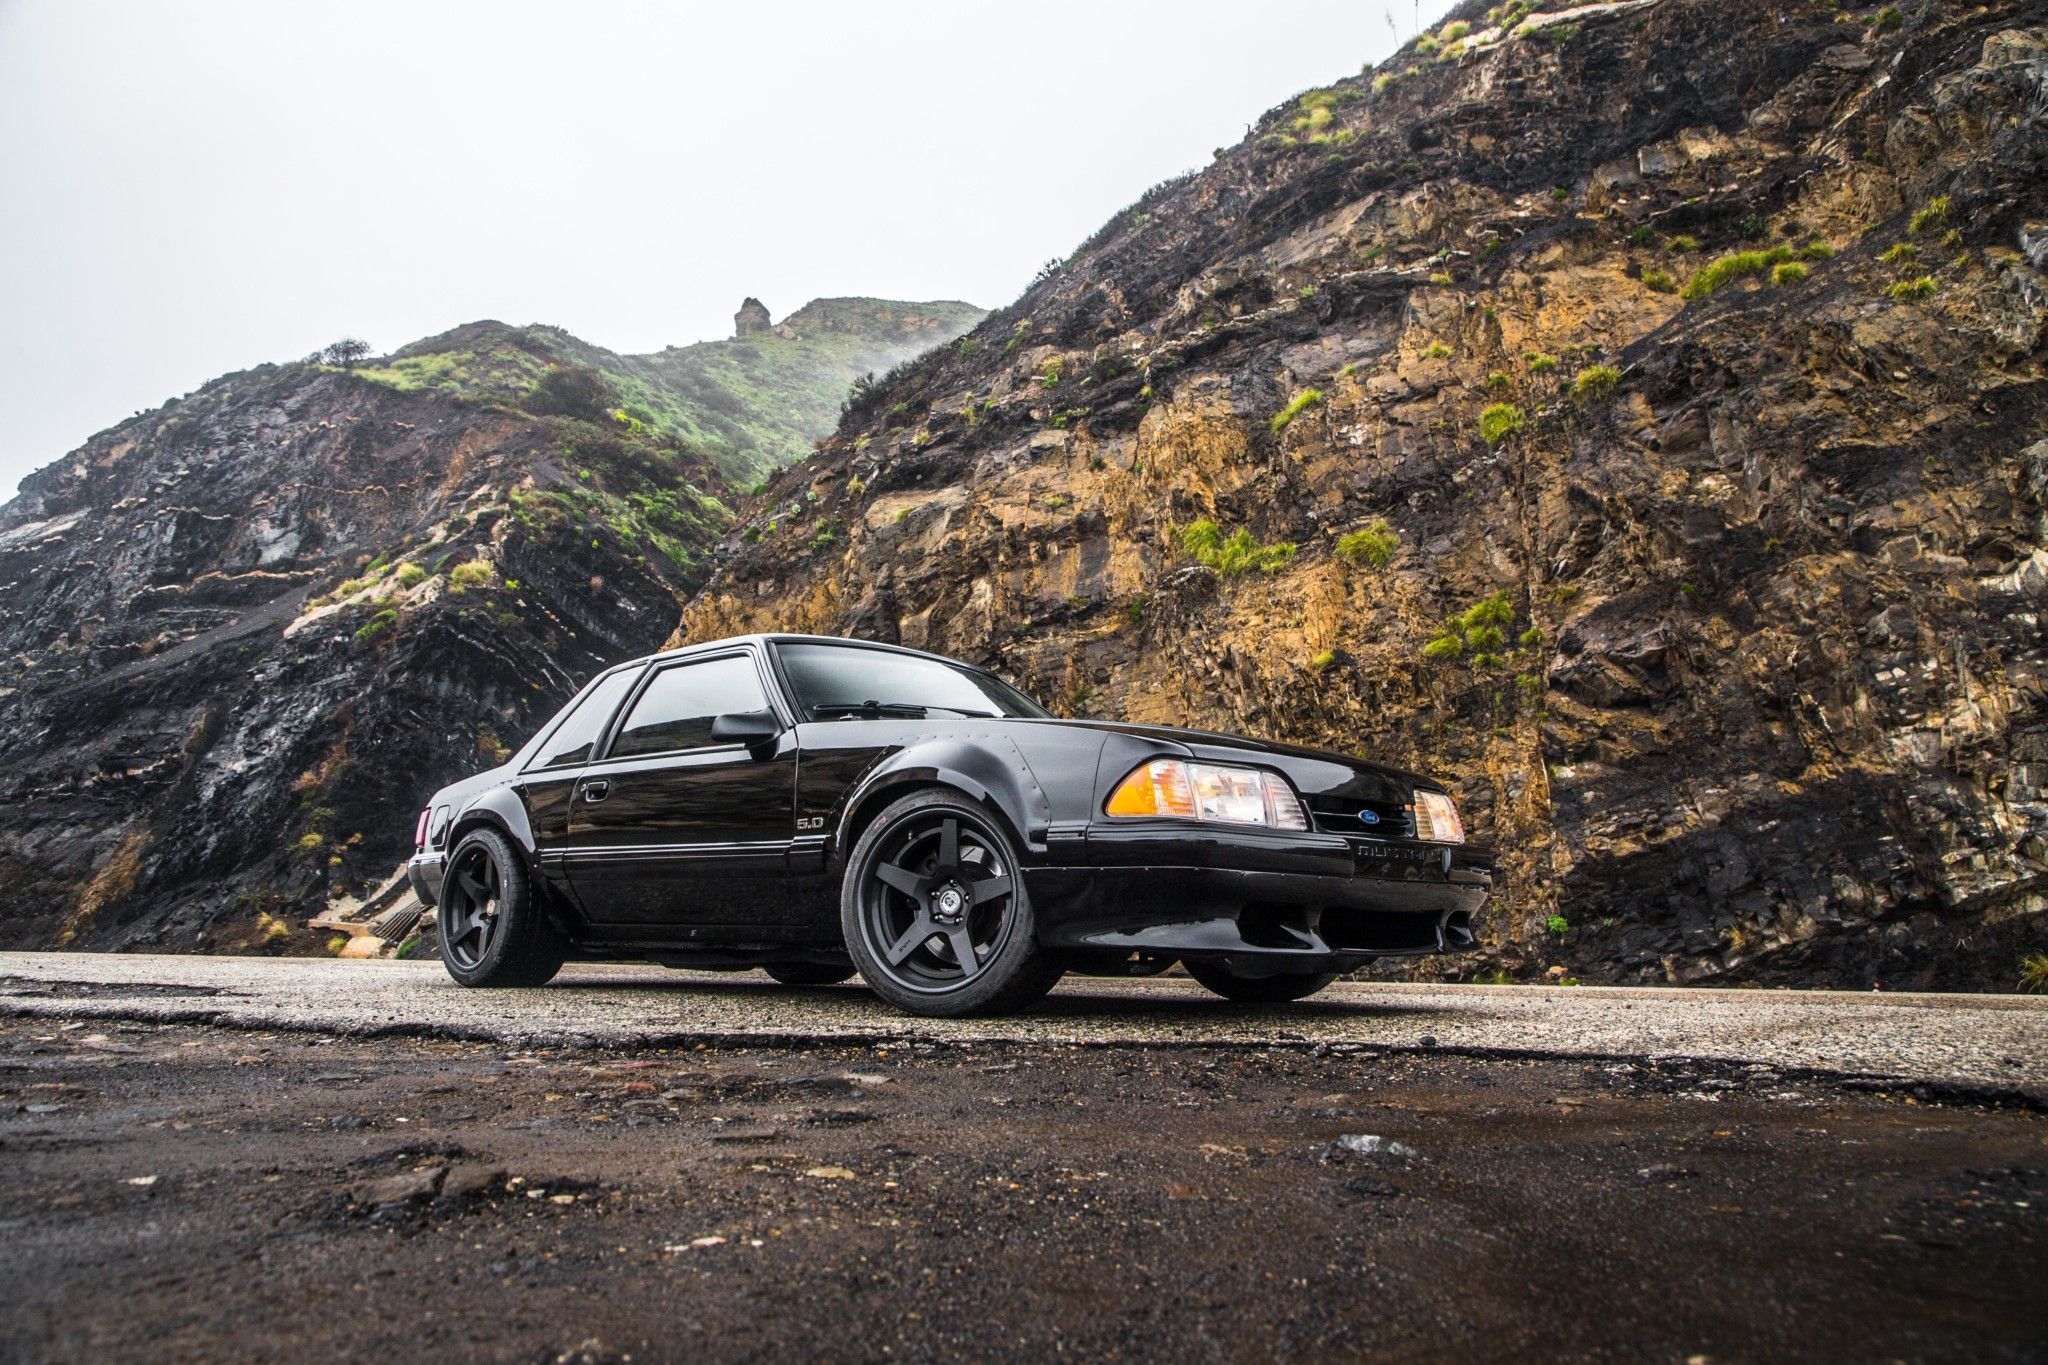 Why Demand & Prices for Foxbody Mustangs Are Rising